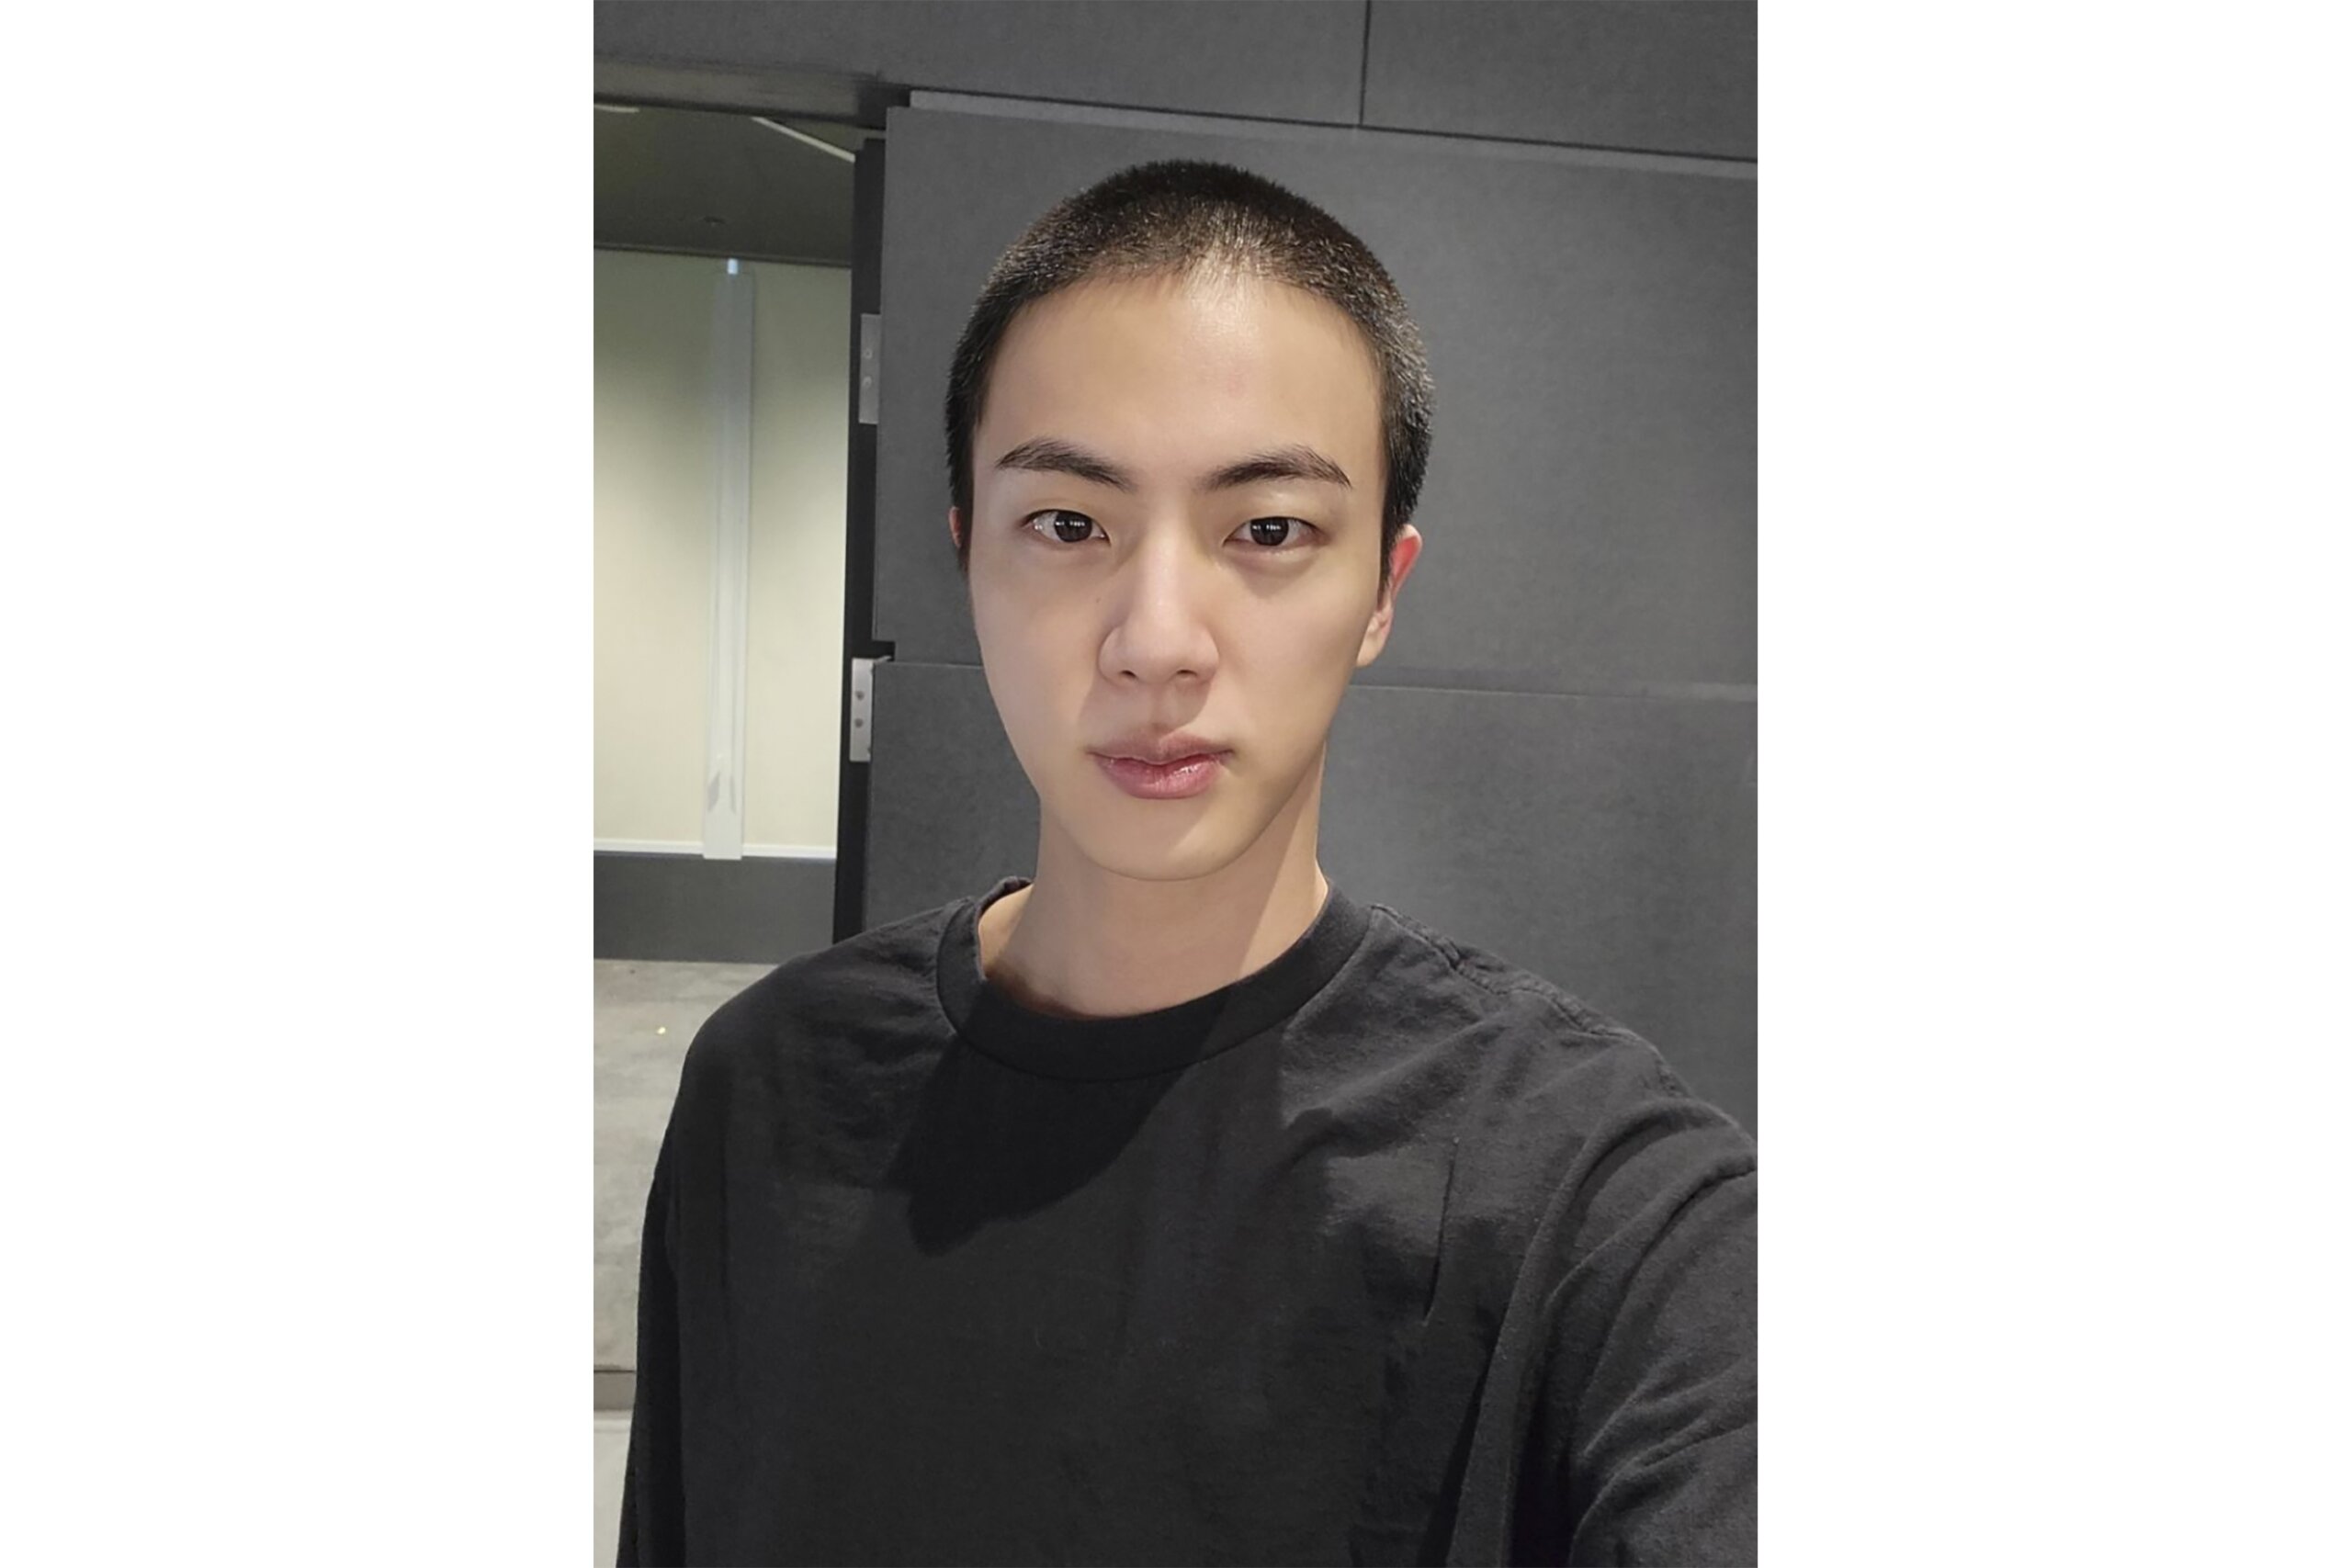 BTS' Jin Shares Photo of New Buzz Cut Ahead of Military Service